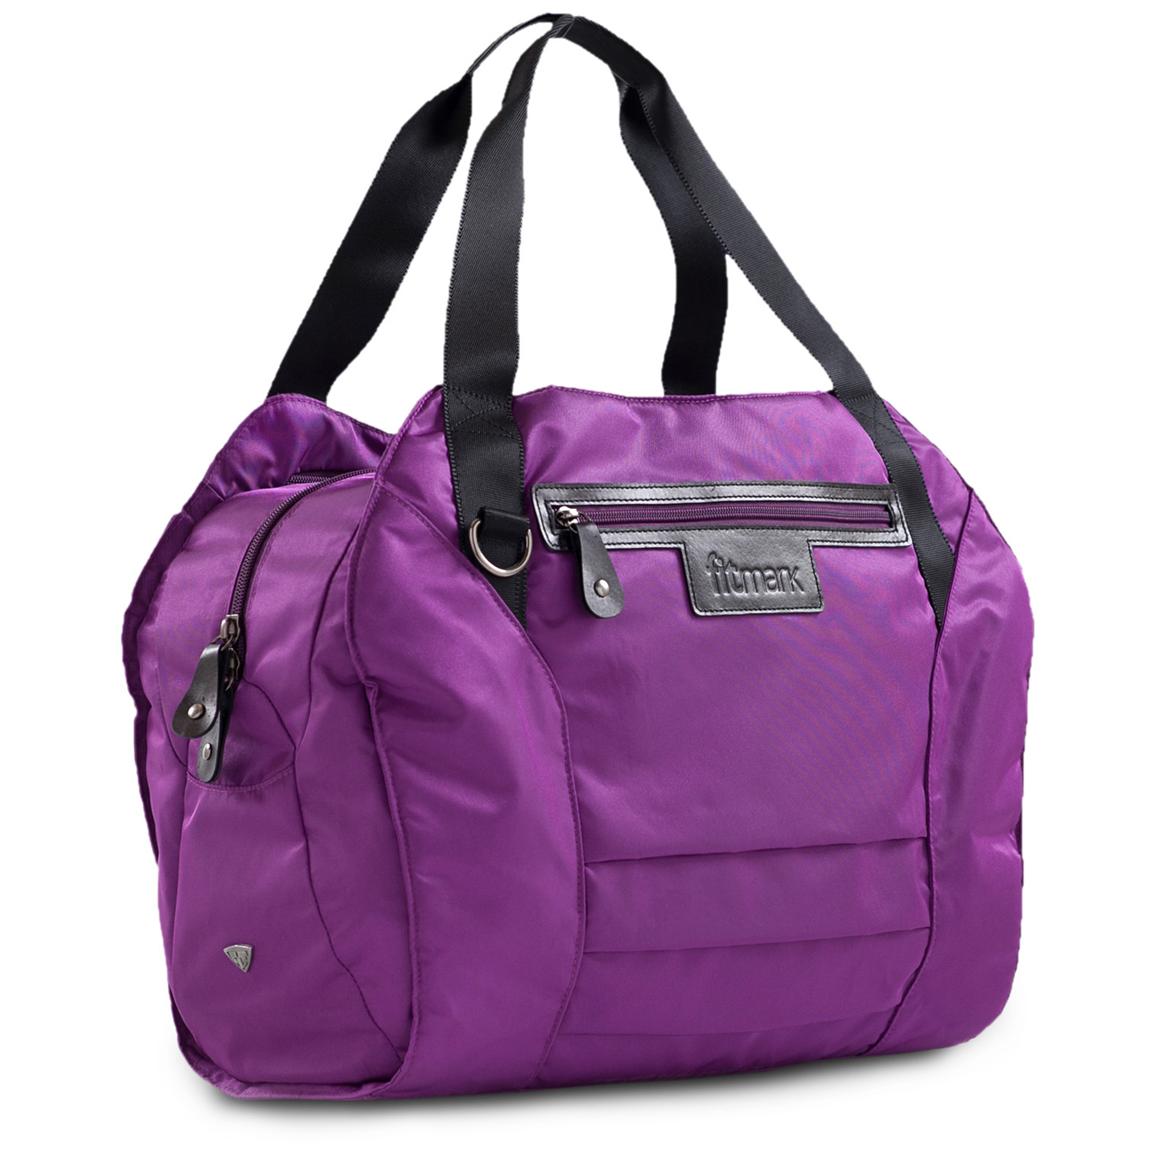 Fitmark™ Sport Tote Bag - 293879, Tote Bags at Sportsman's Guide